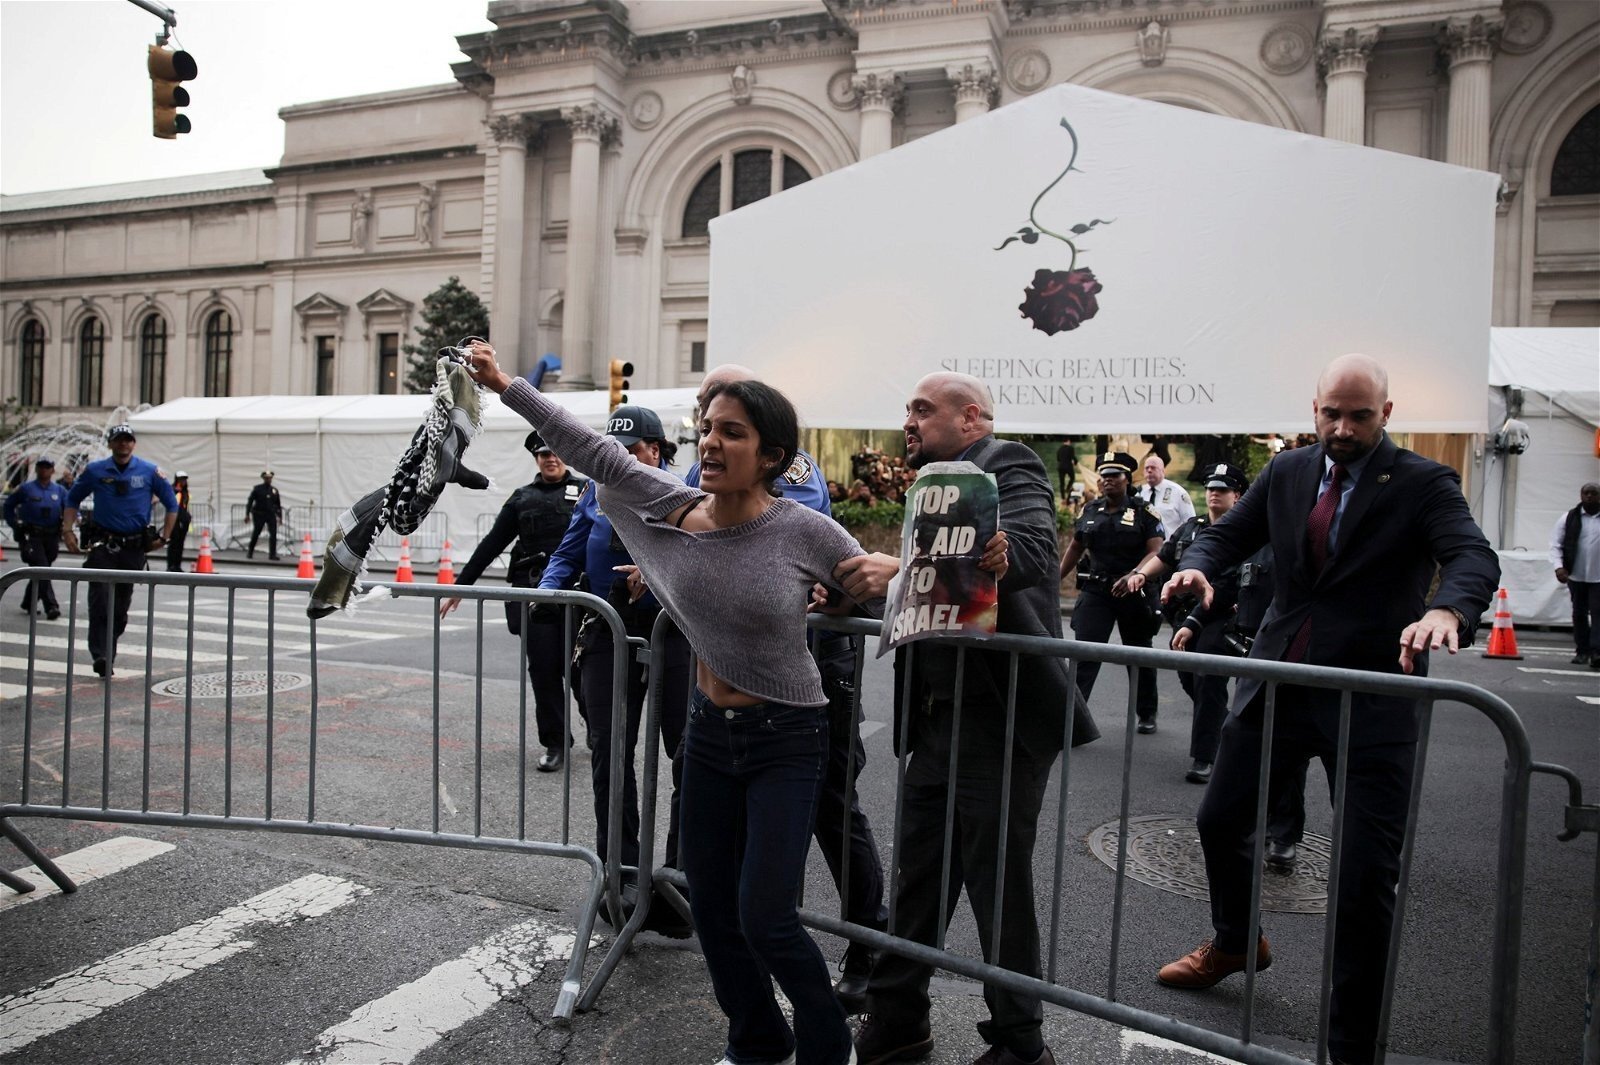 A woman yells as she's grabbed by a police officer outside the Met Gala.